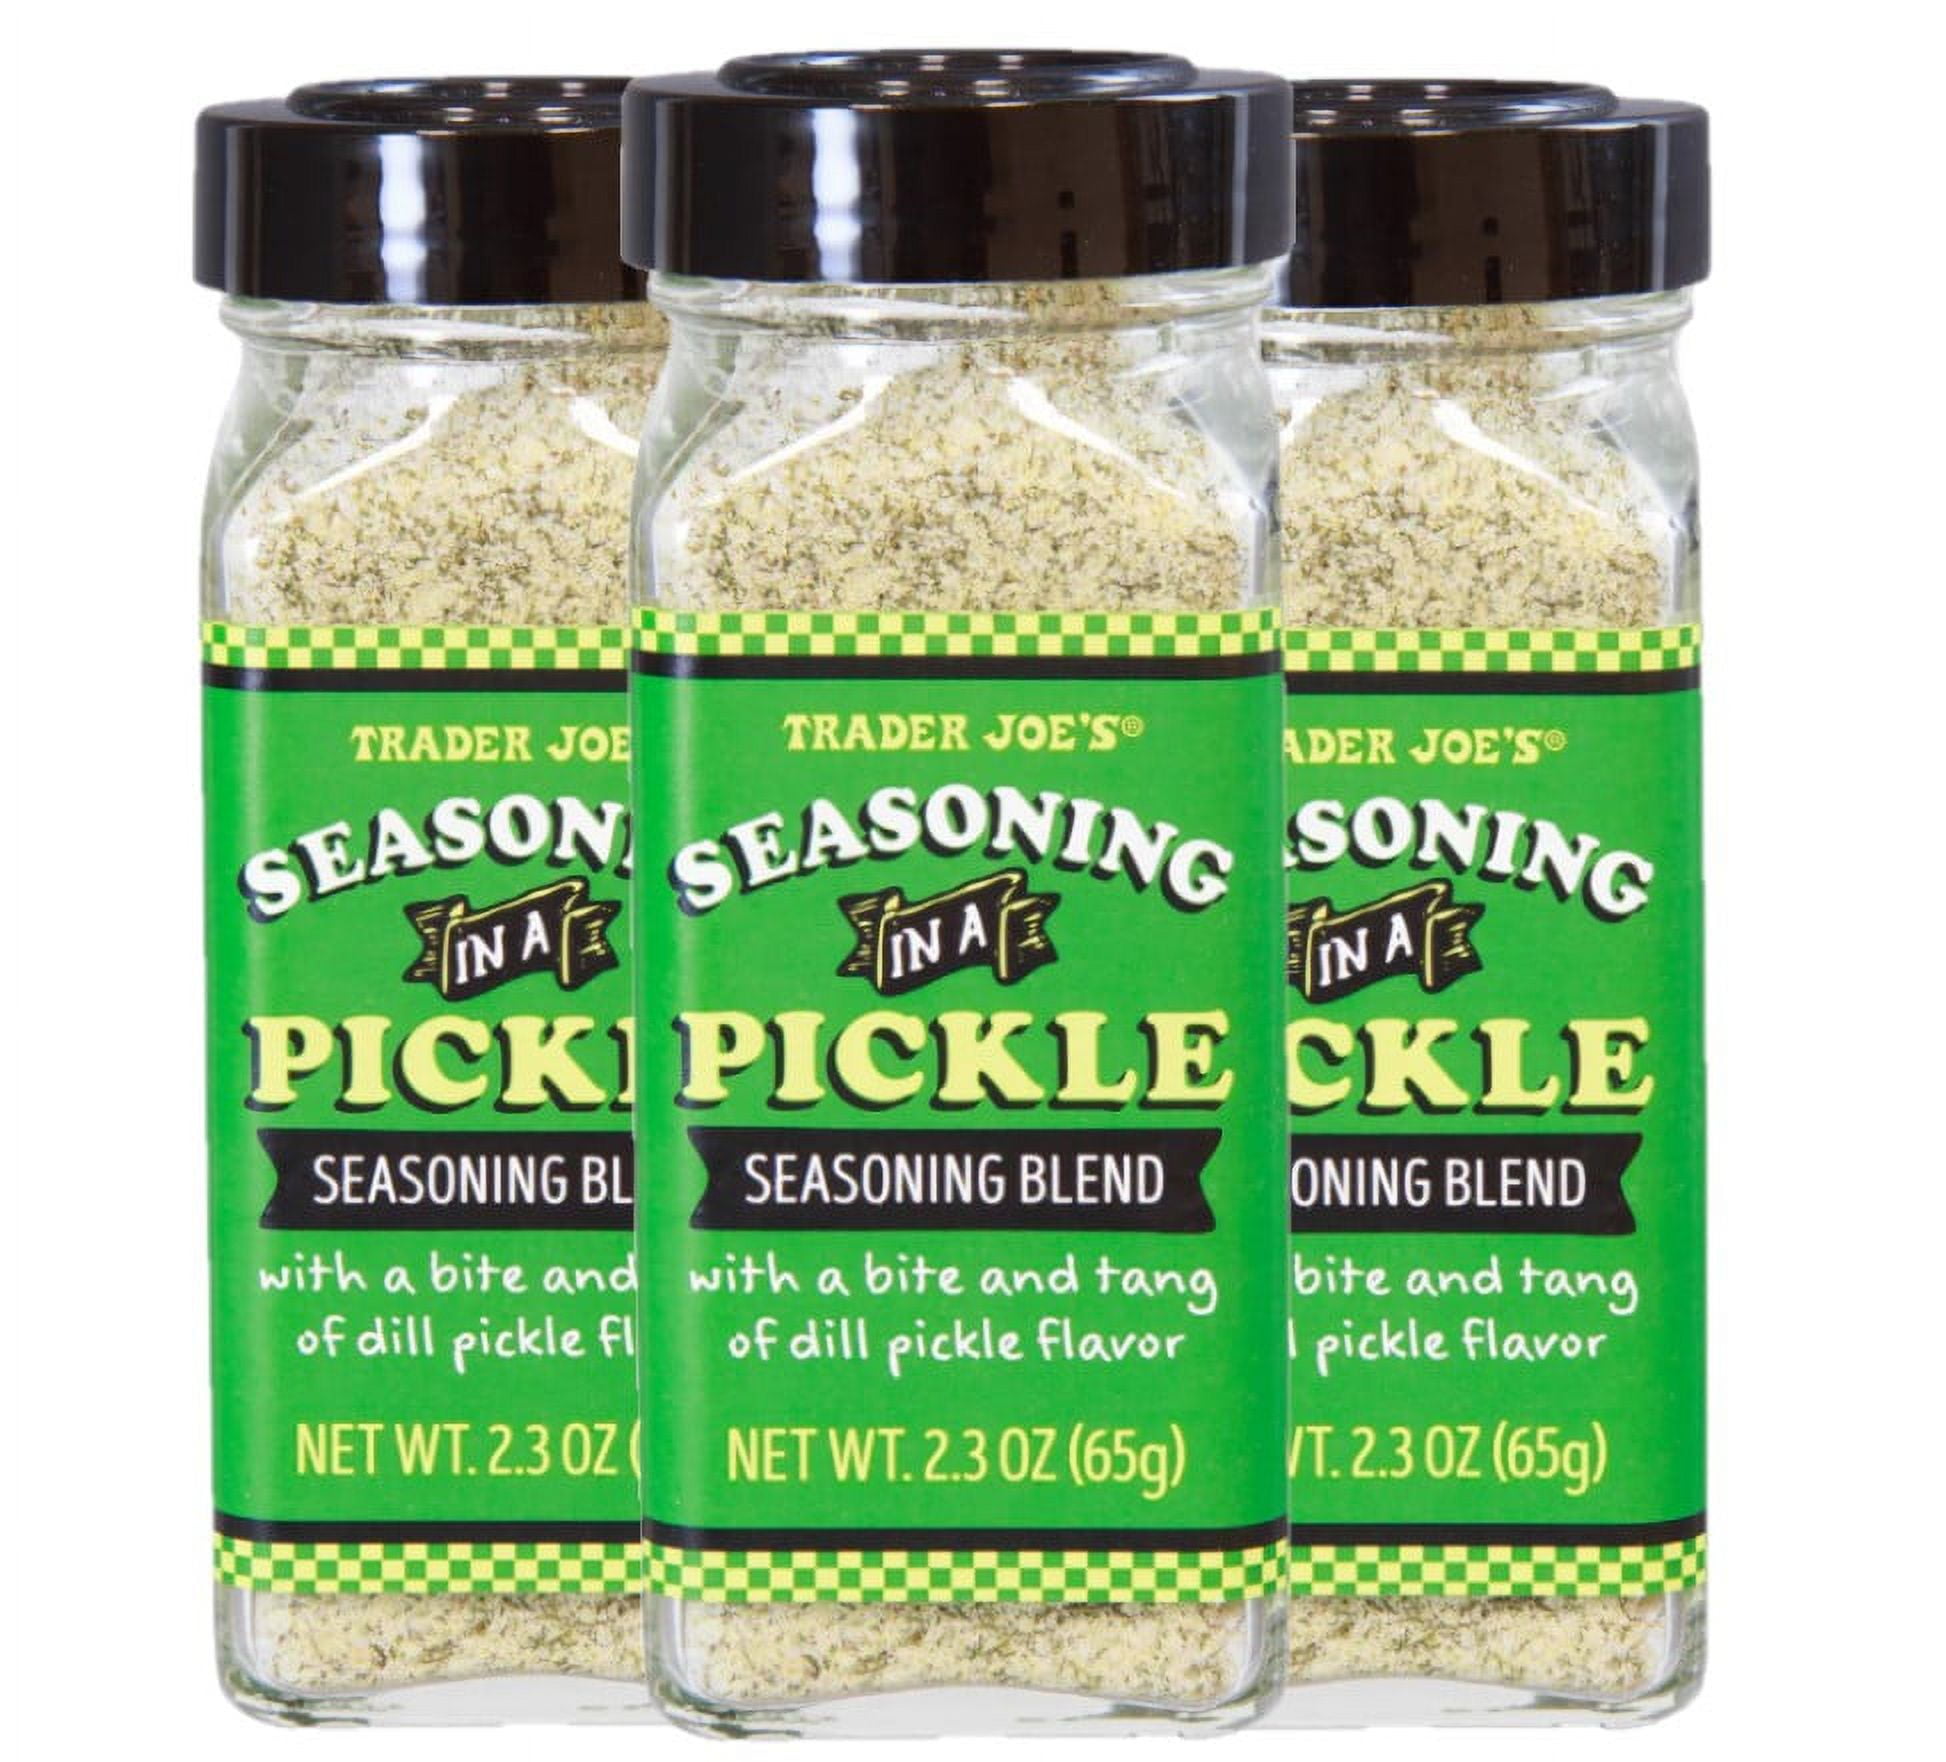 Trader Joe's dill pickle seasoning is an absolute game changer for